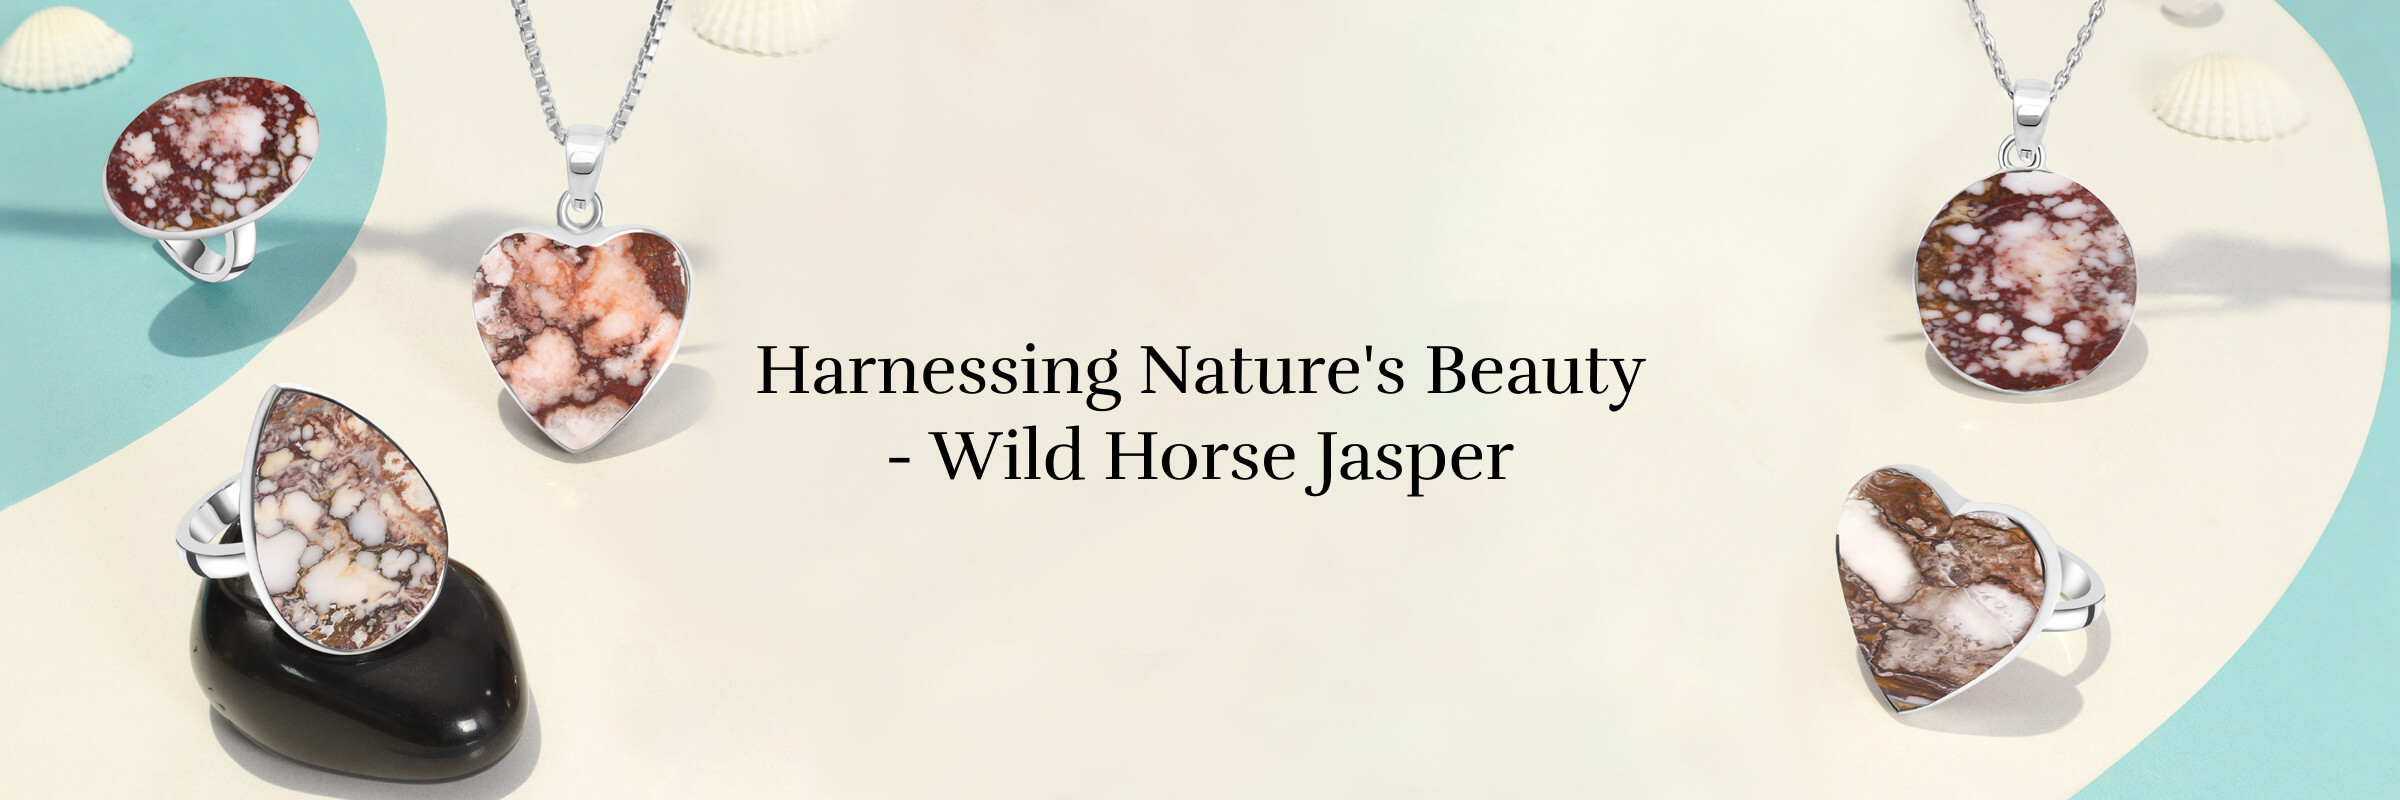 Significance and Uses of Wild Horse Jasper